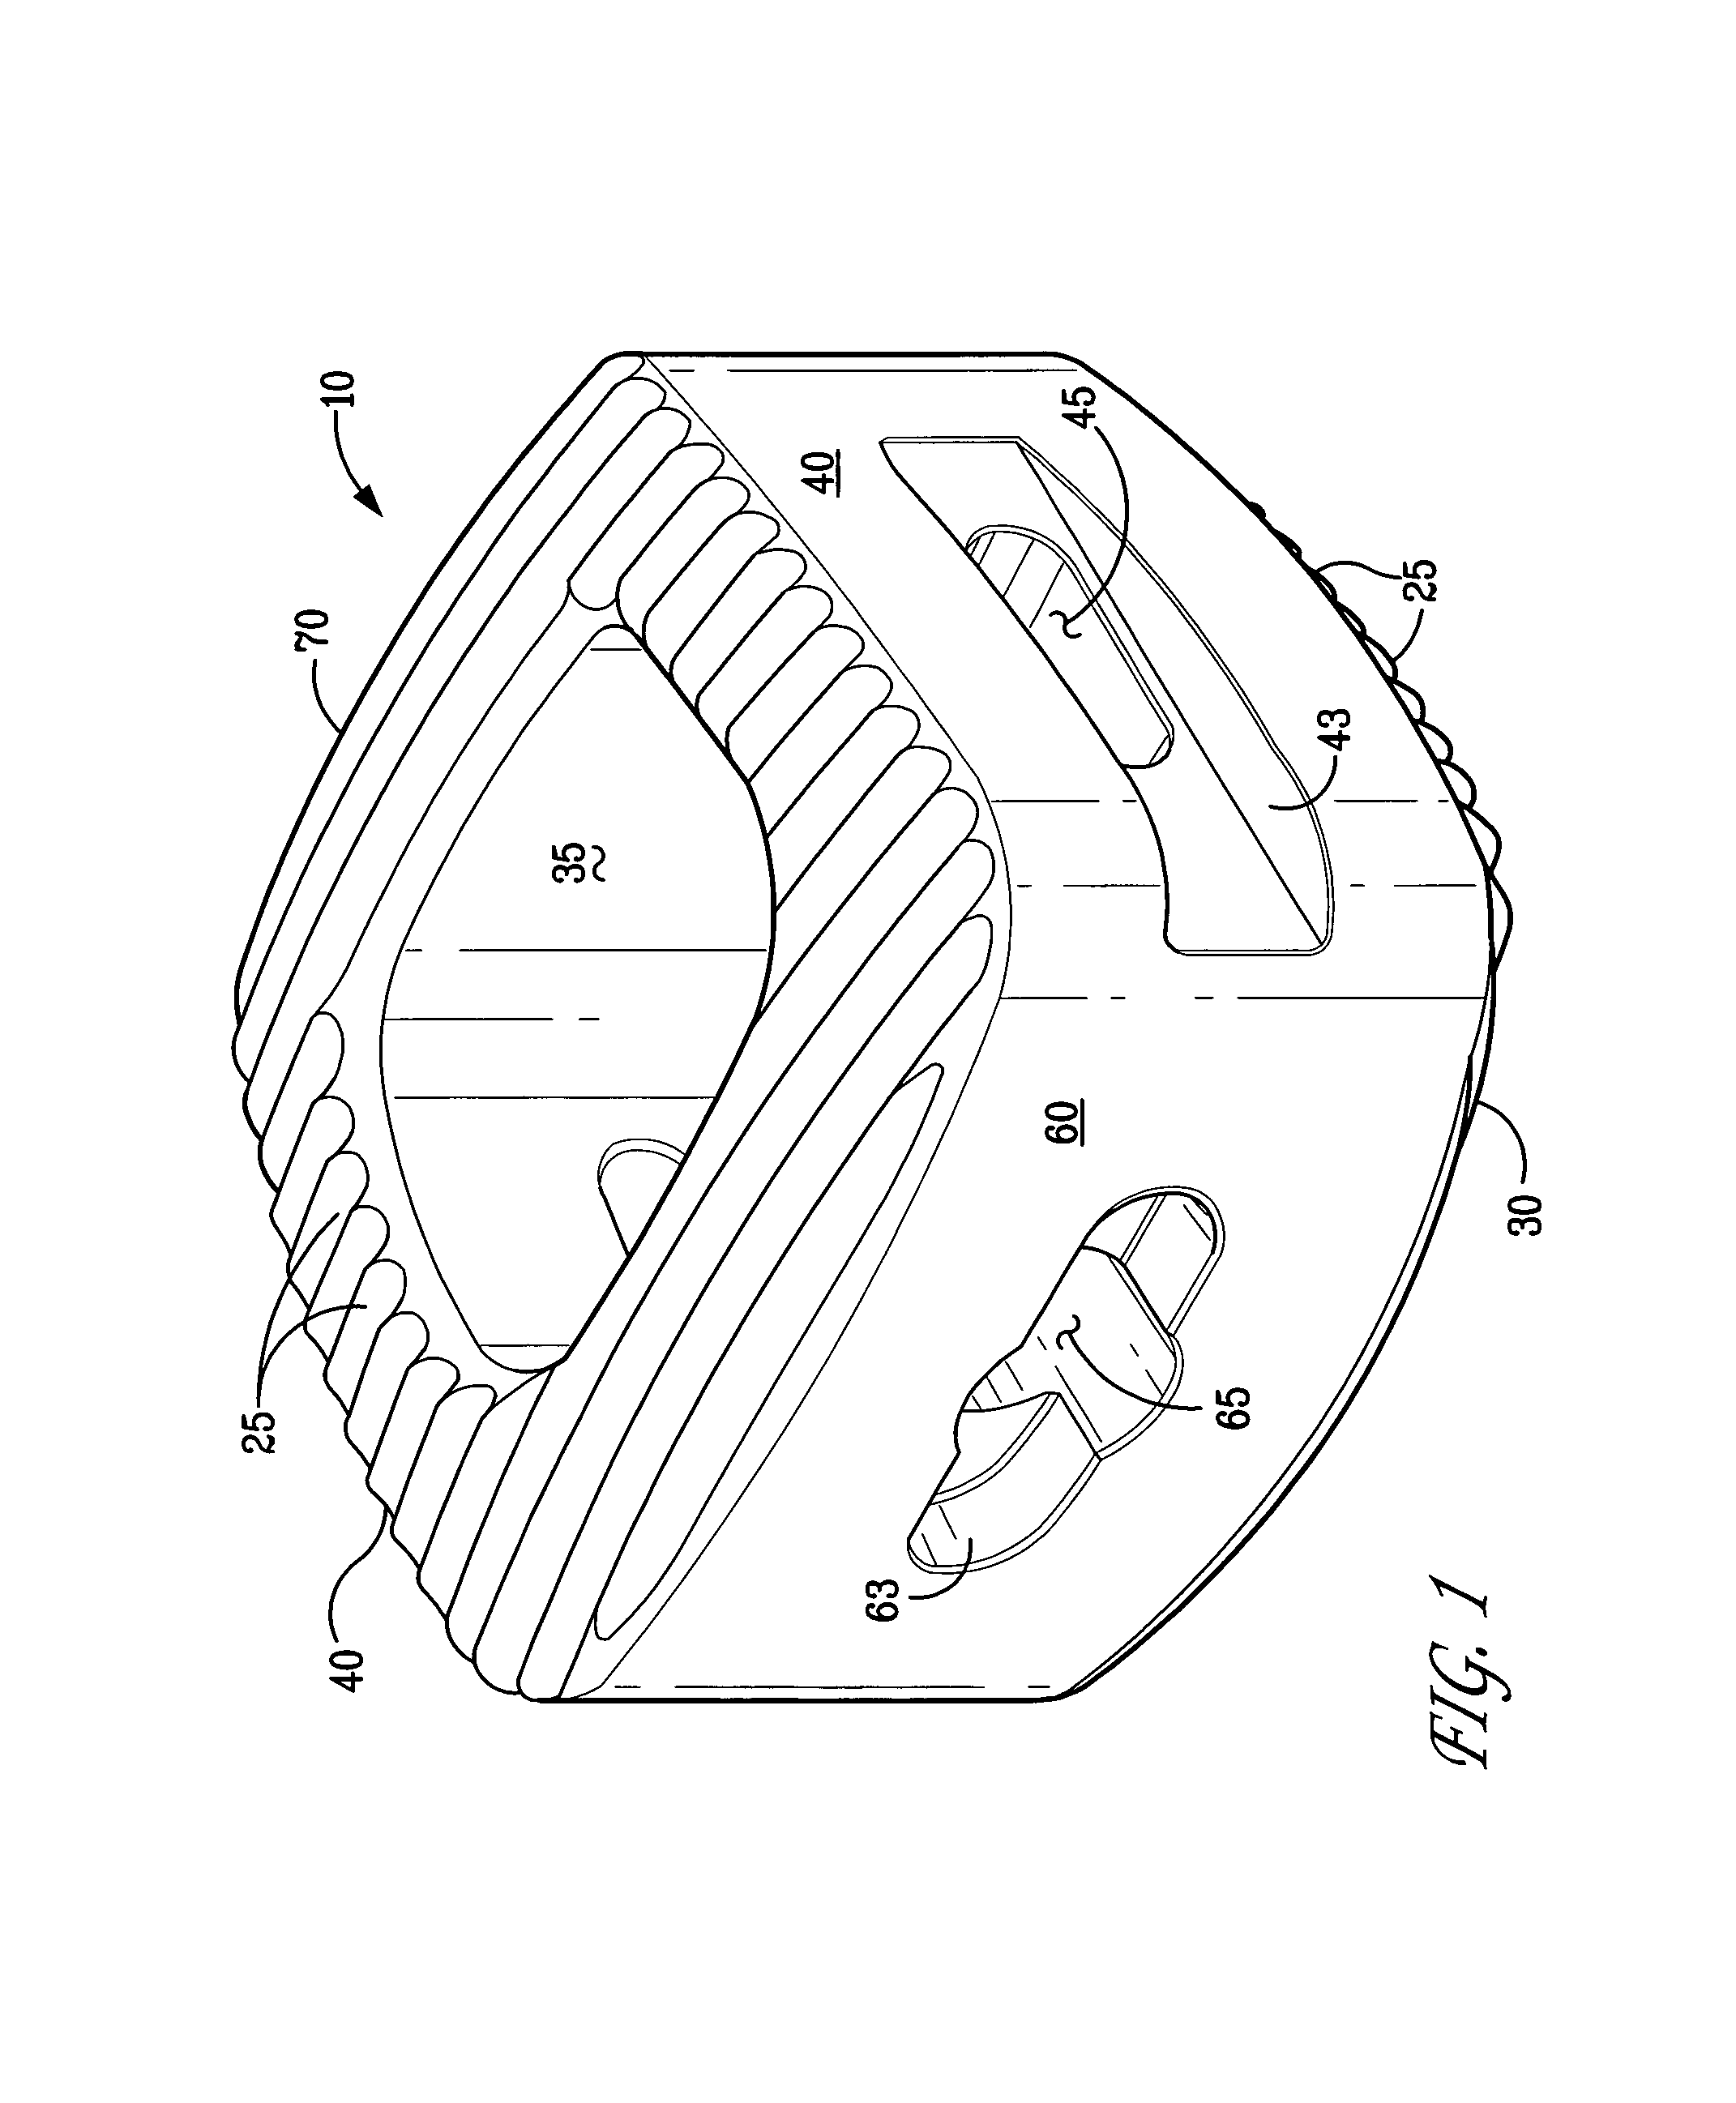 Bioactive spinal implants and method of manufacture thereof